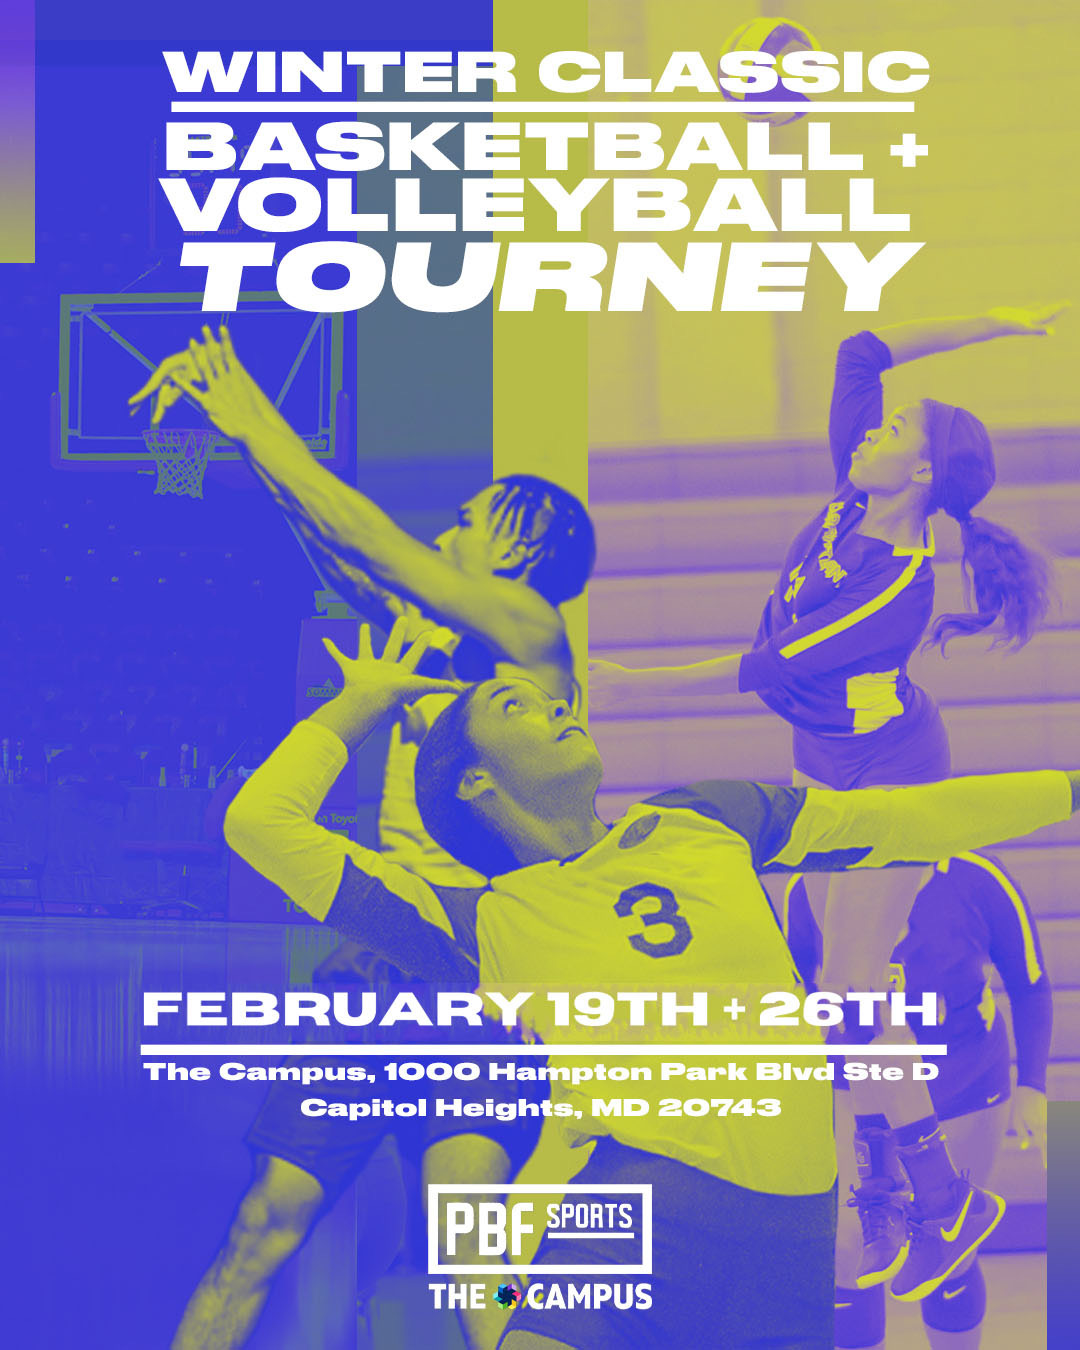 Winter Classic Basketball + Volleyball Tourney